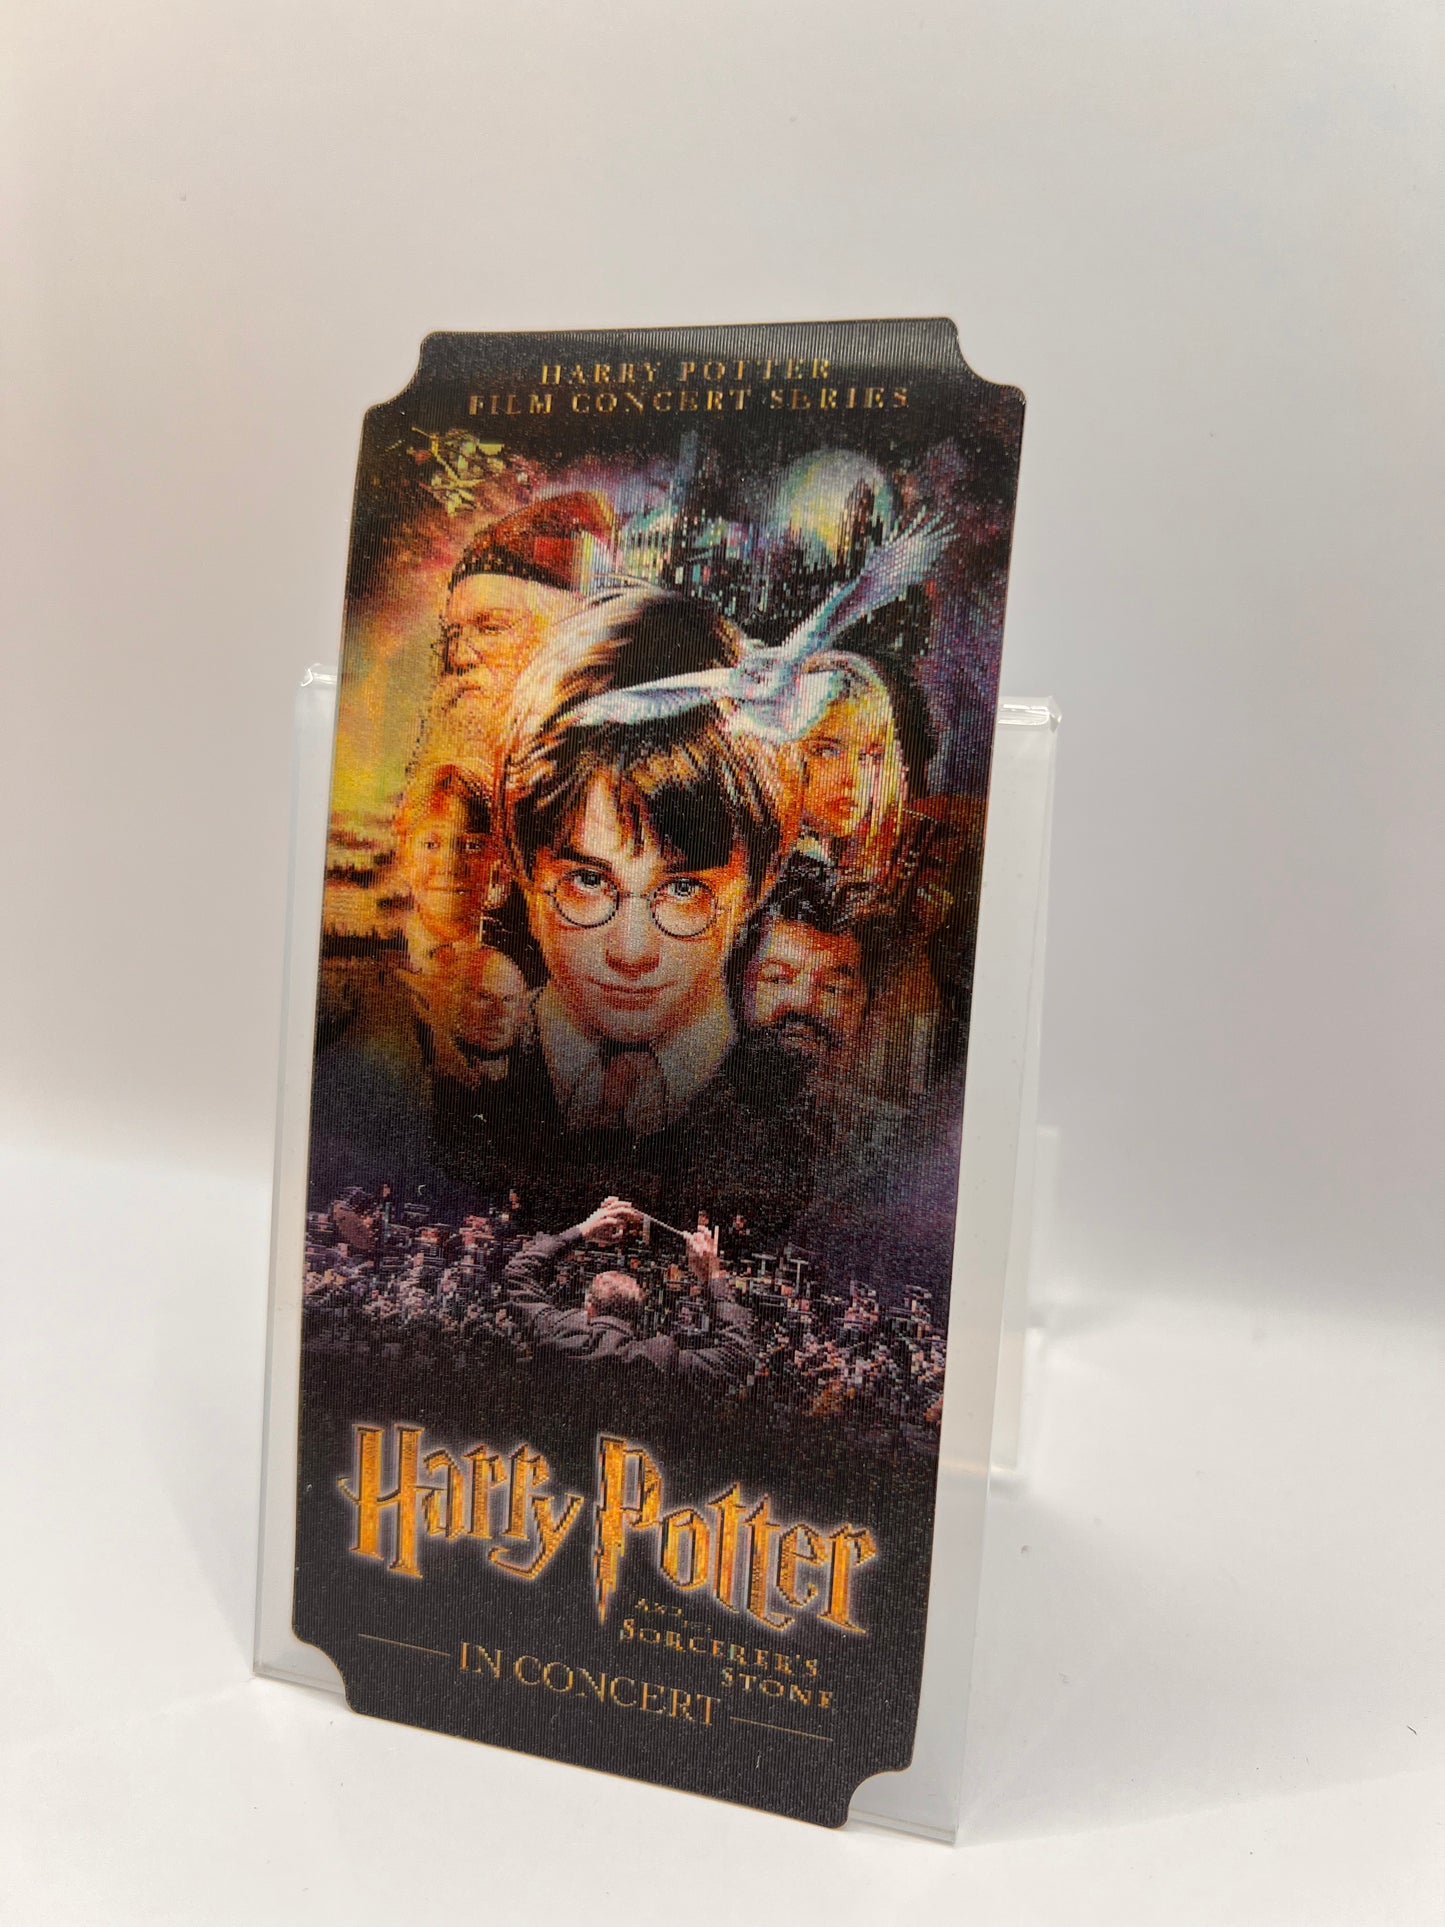 Harry Potter and the Sorcerer's Stone™ in Concert Souvenir Ticket